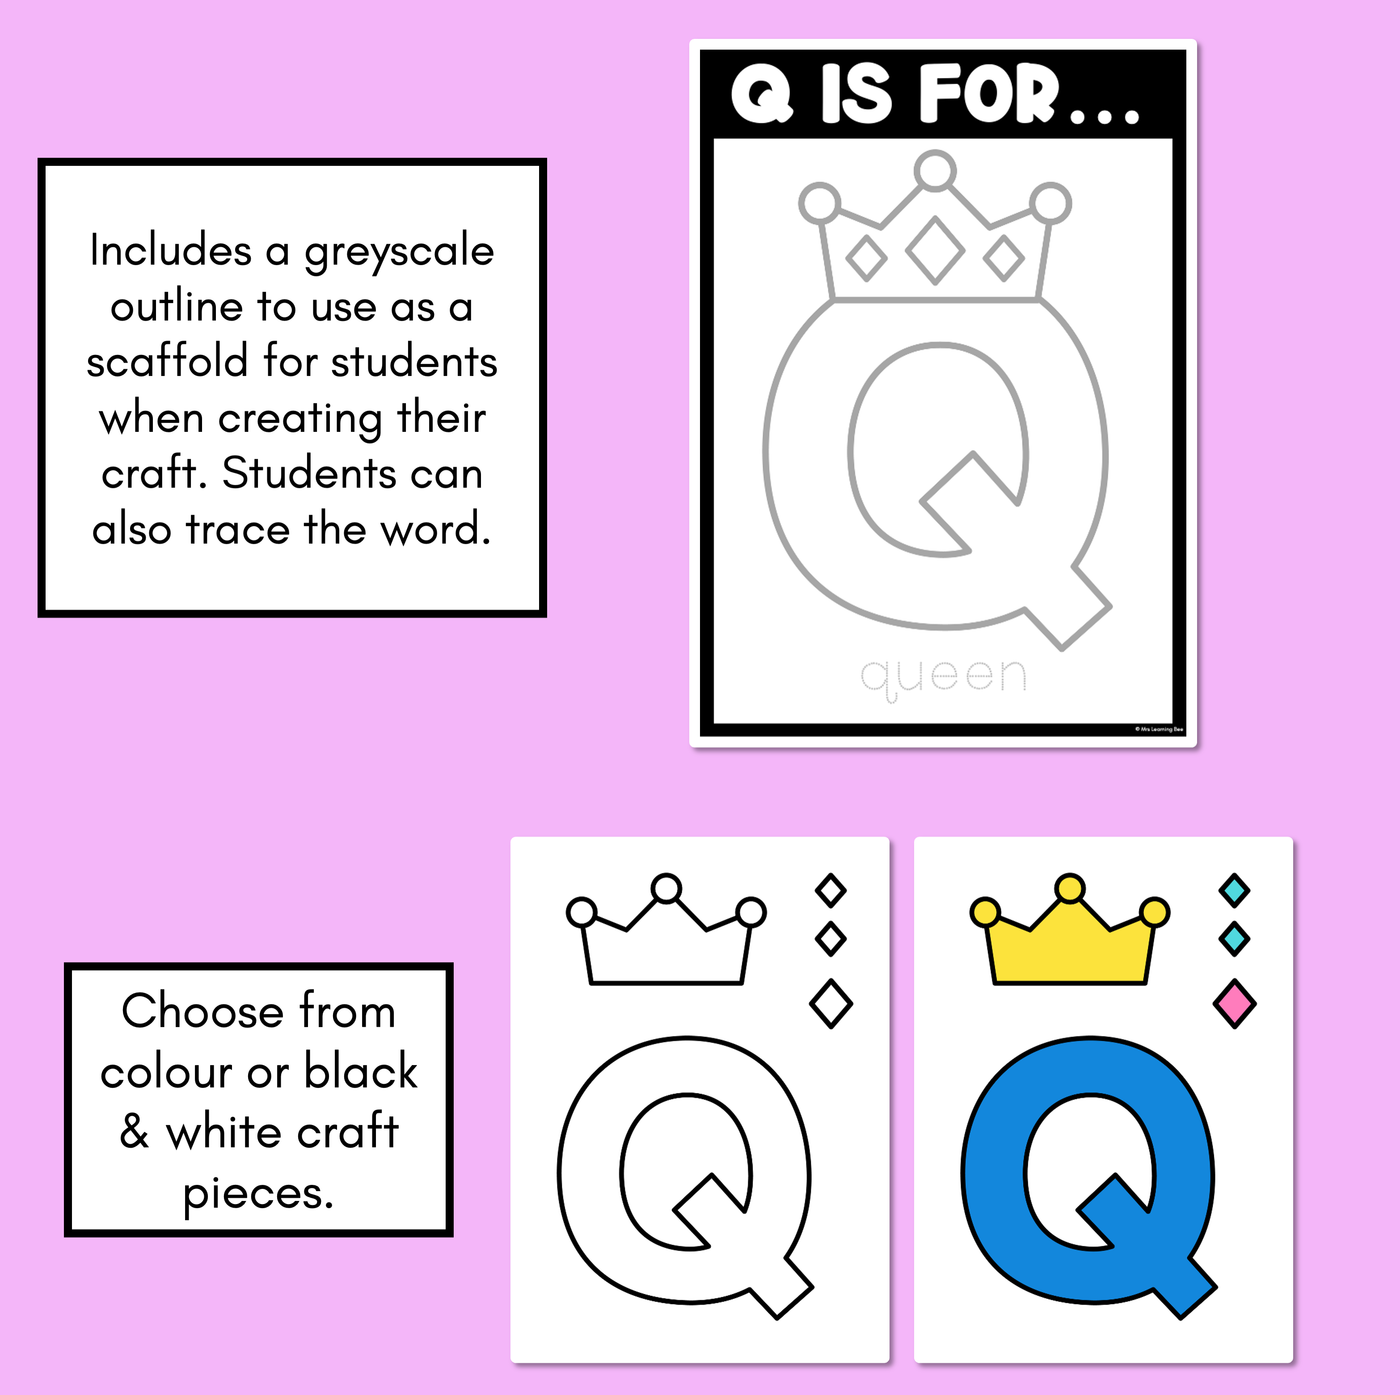 Beginning Sound Crafts - Letter Q - Q is for Queen